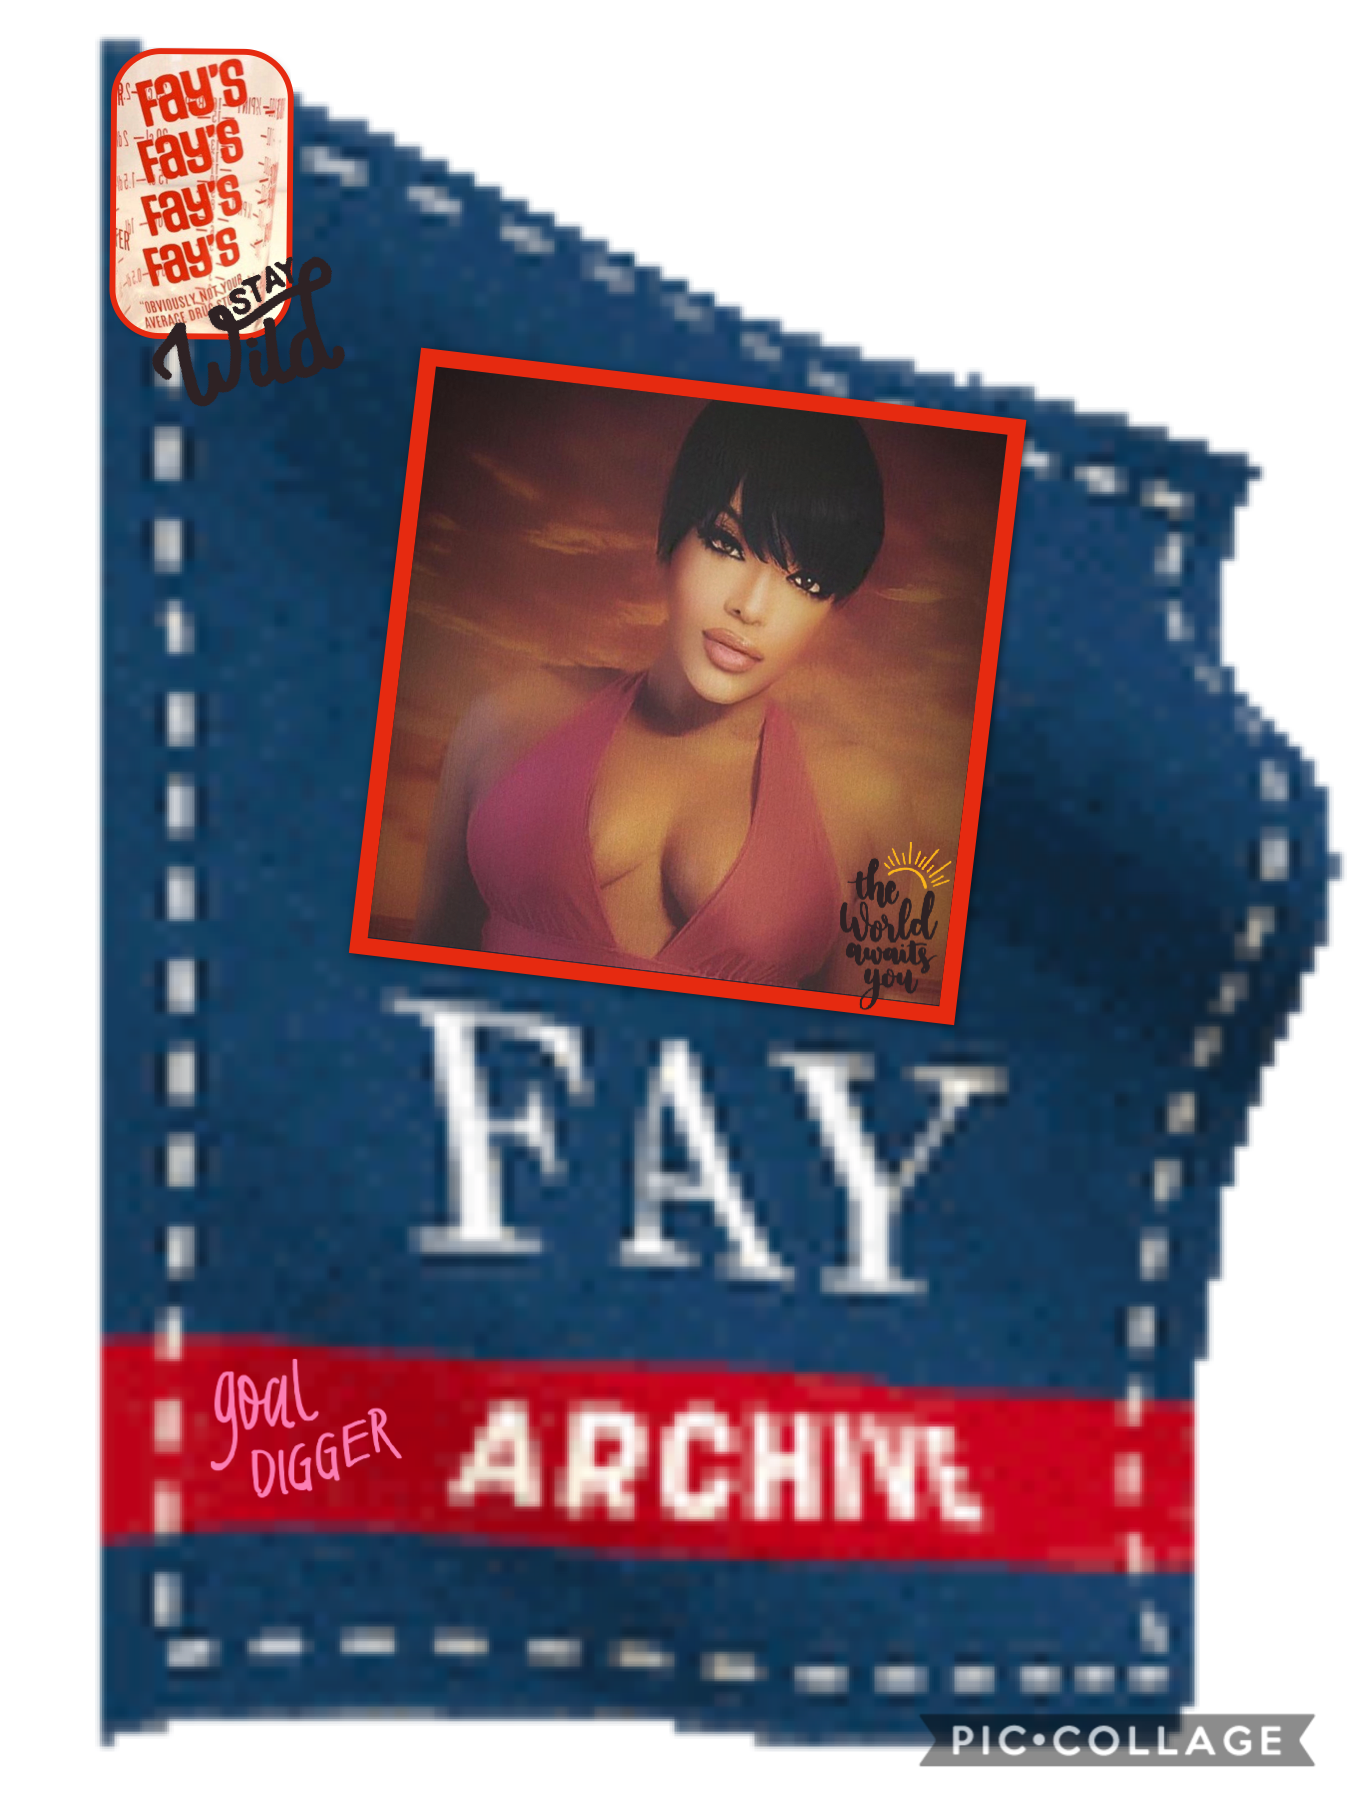 Fay’s archive 